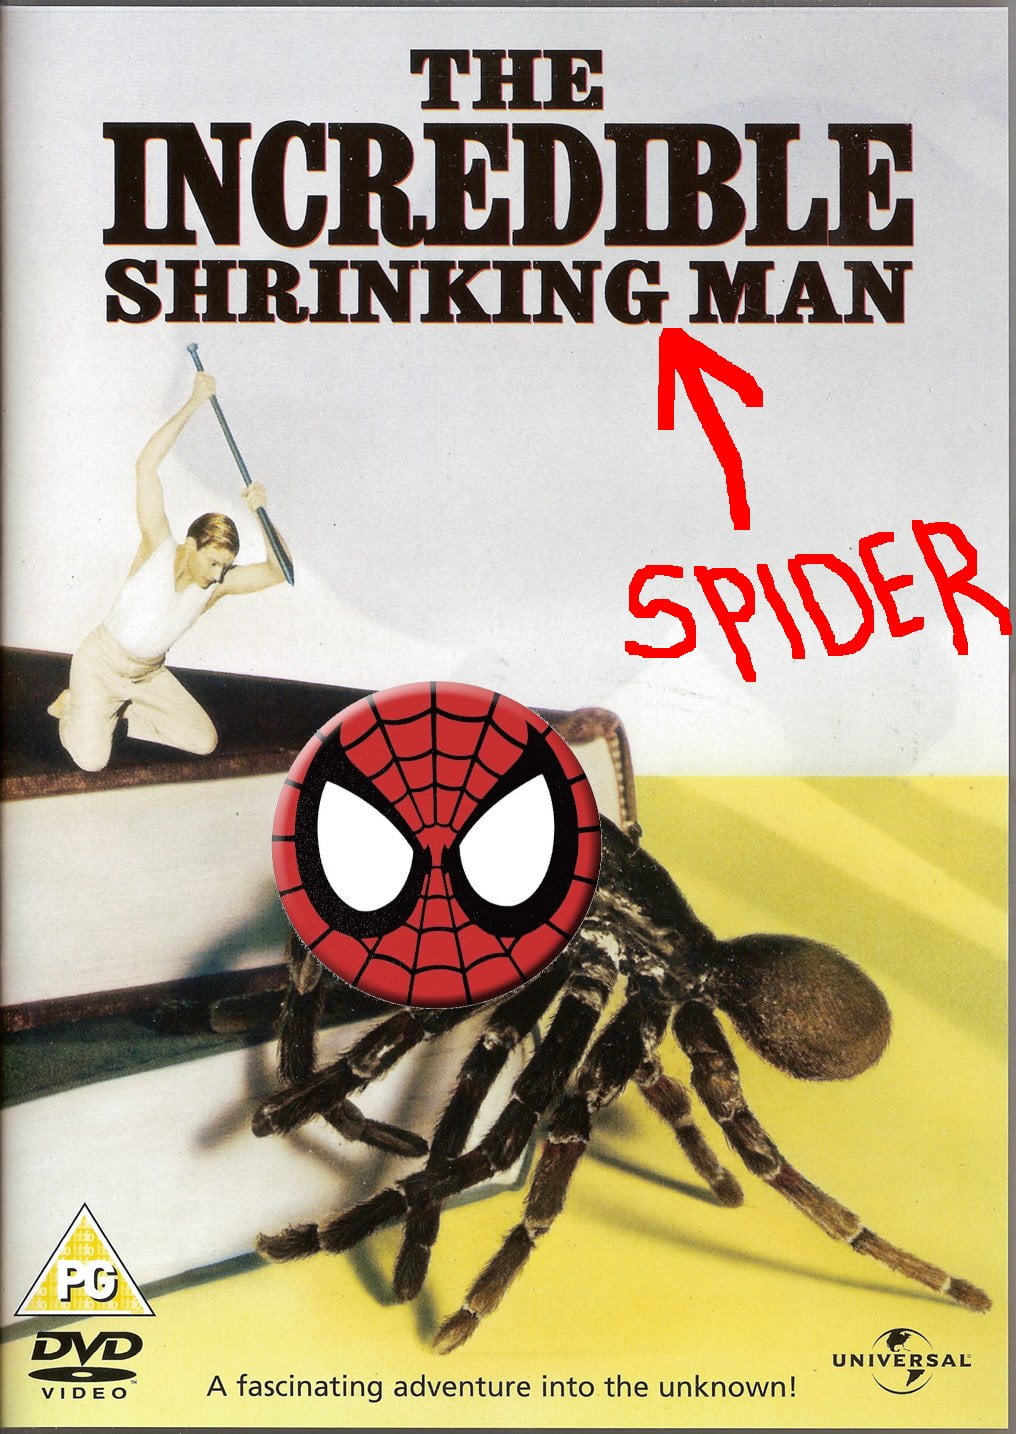 Spidey 81, Episode 15: The Incredible Shrinking Spider-Man